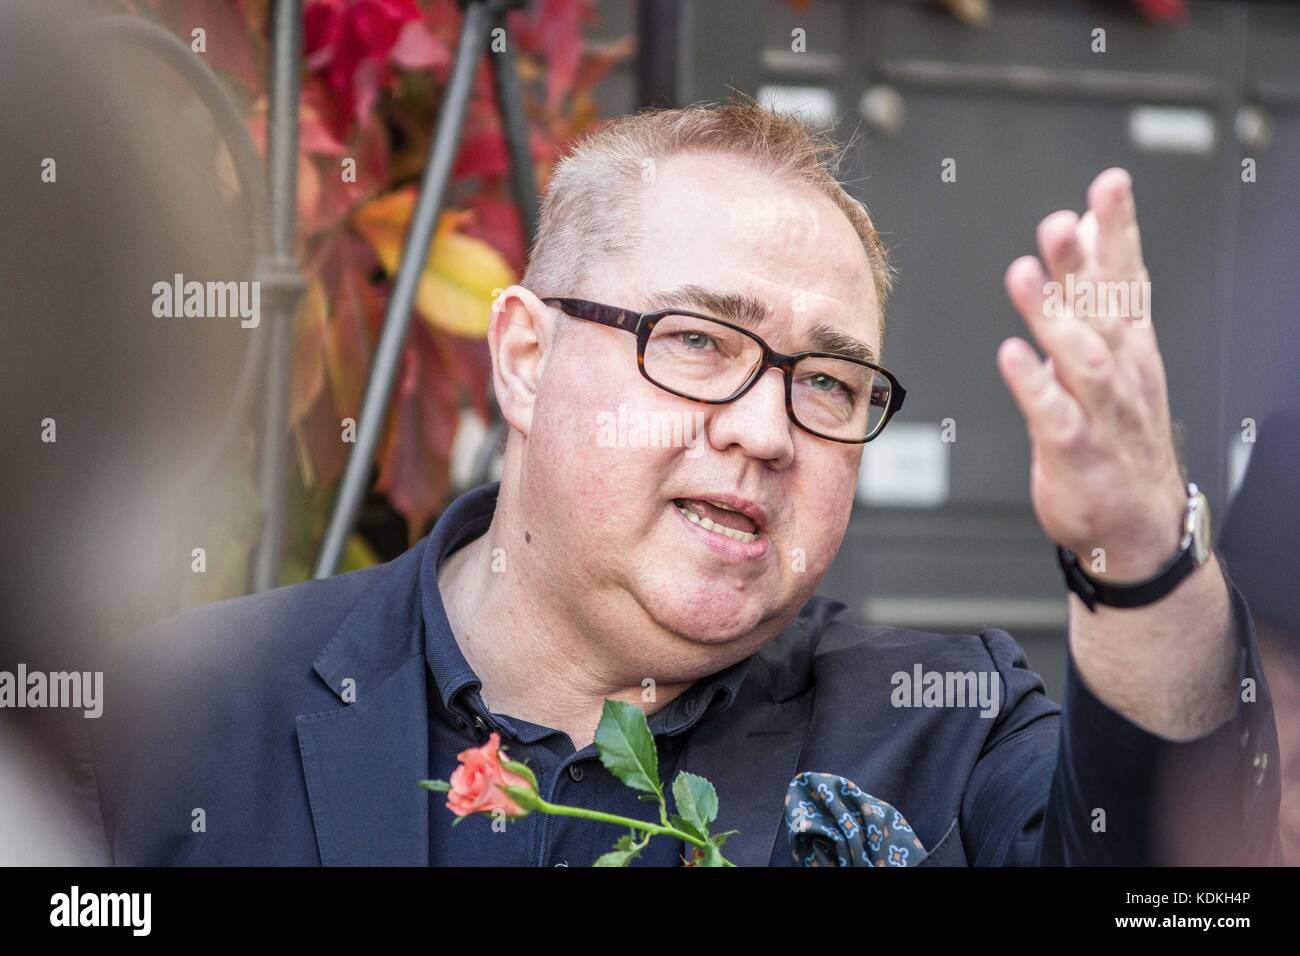 Munich, Bavaria, Germany. 14th Oct, 2017. Politician and activist Beppo Brem. Despite lengthy battles, the so-called Stolpersteine ('Stumbling Blocks'') containing the names & information of victims of National Socialism were installed at four different sites in Munich. The City of Munich forbid the installation of the memorial stones on public ground in 2015, which led the Stolpersteine Initiative (''˜Stumbling Block Initiative'') to seek private properties to install them. To date, 61,000 Stolpersteine in 2,000 cities in 21 countries have been dedicated, with much criticism lobbed Stock Photo